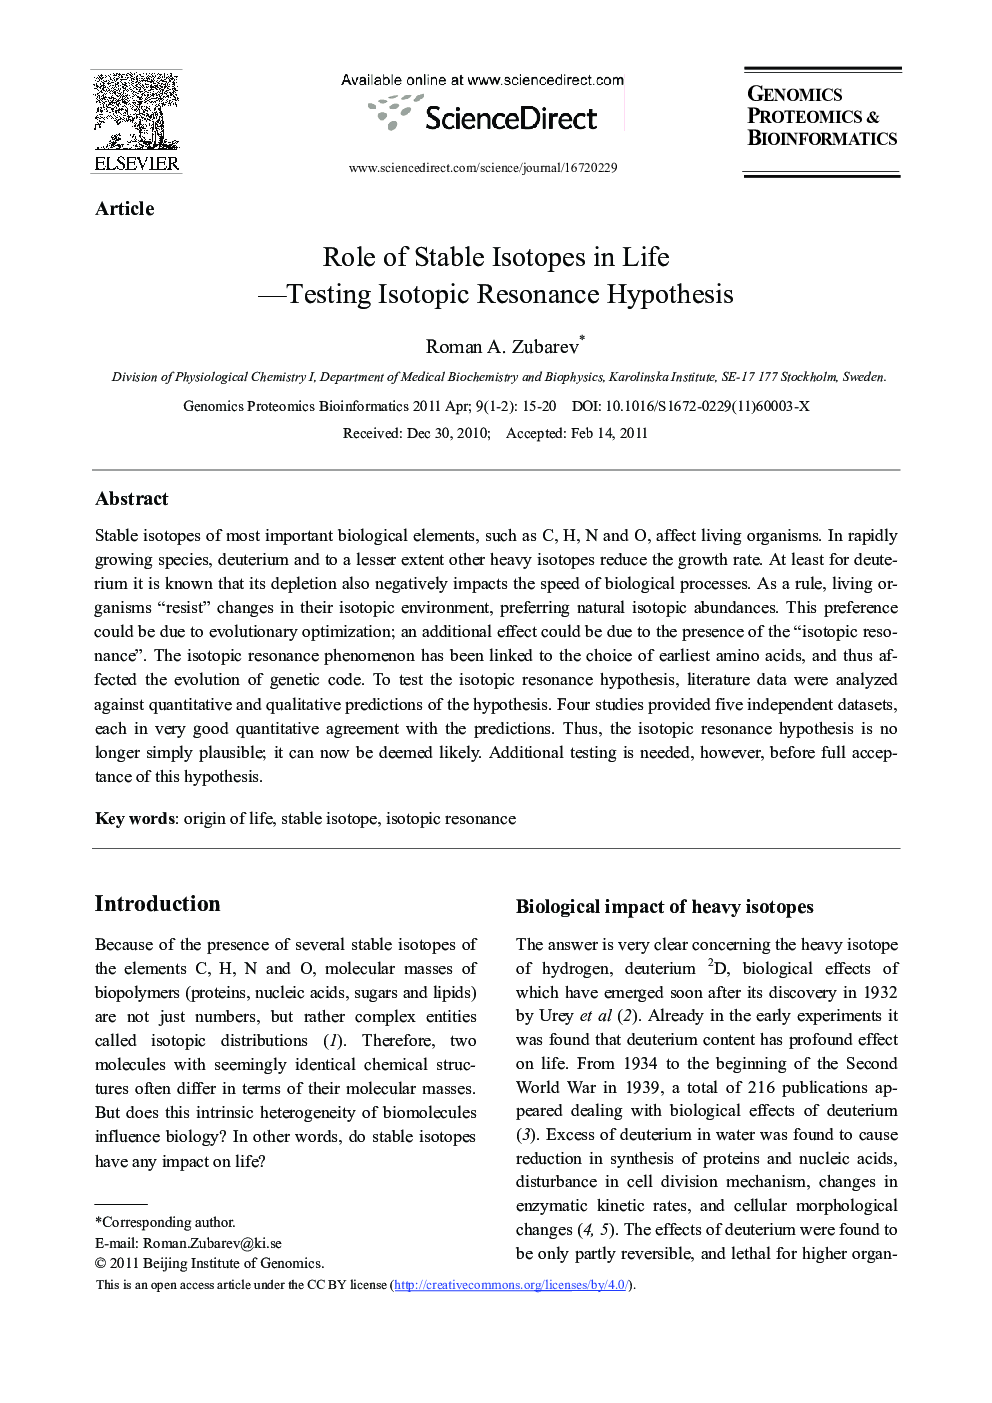 Role of Stable Isotopes in Life—Testing Isotopic Resonance Hypothesis